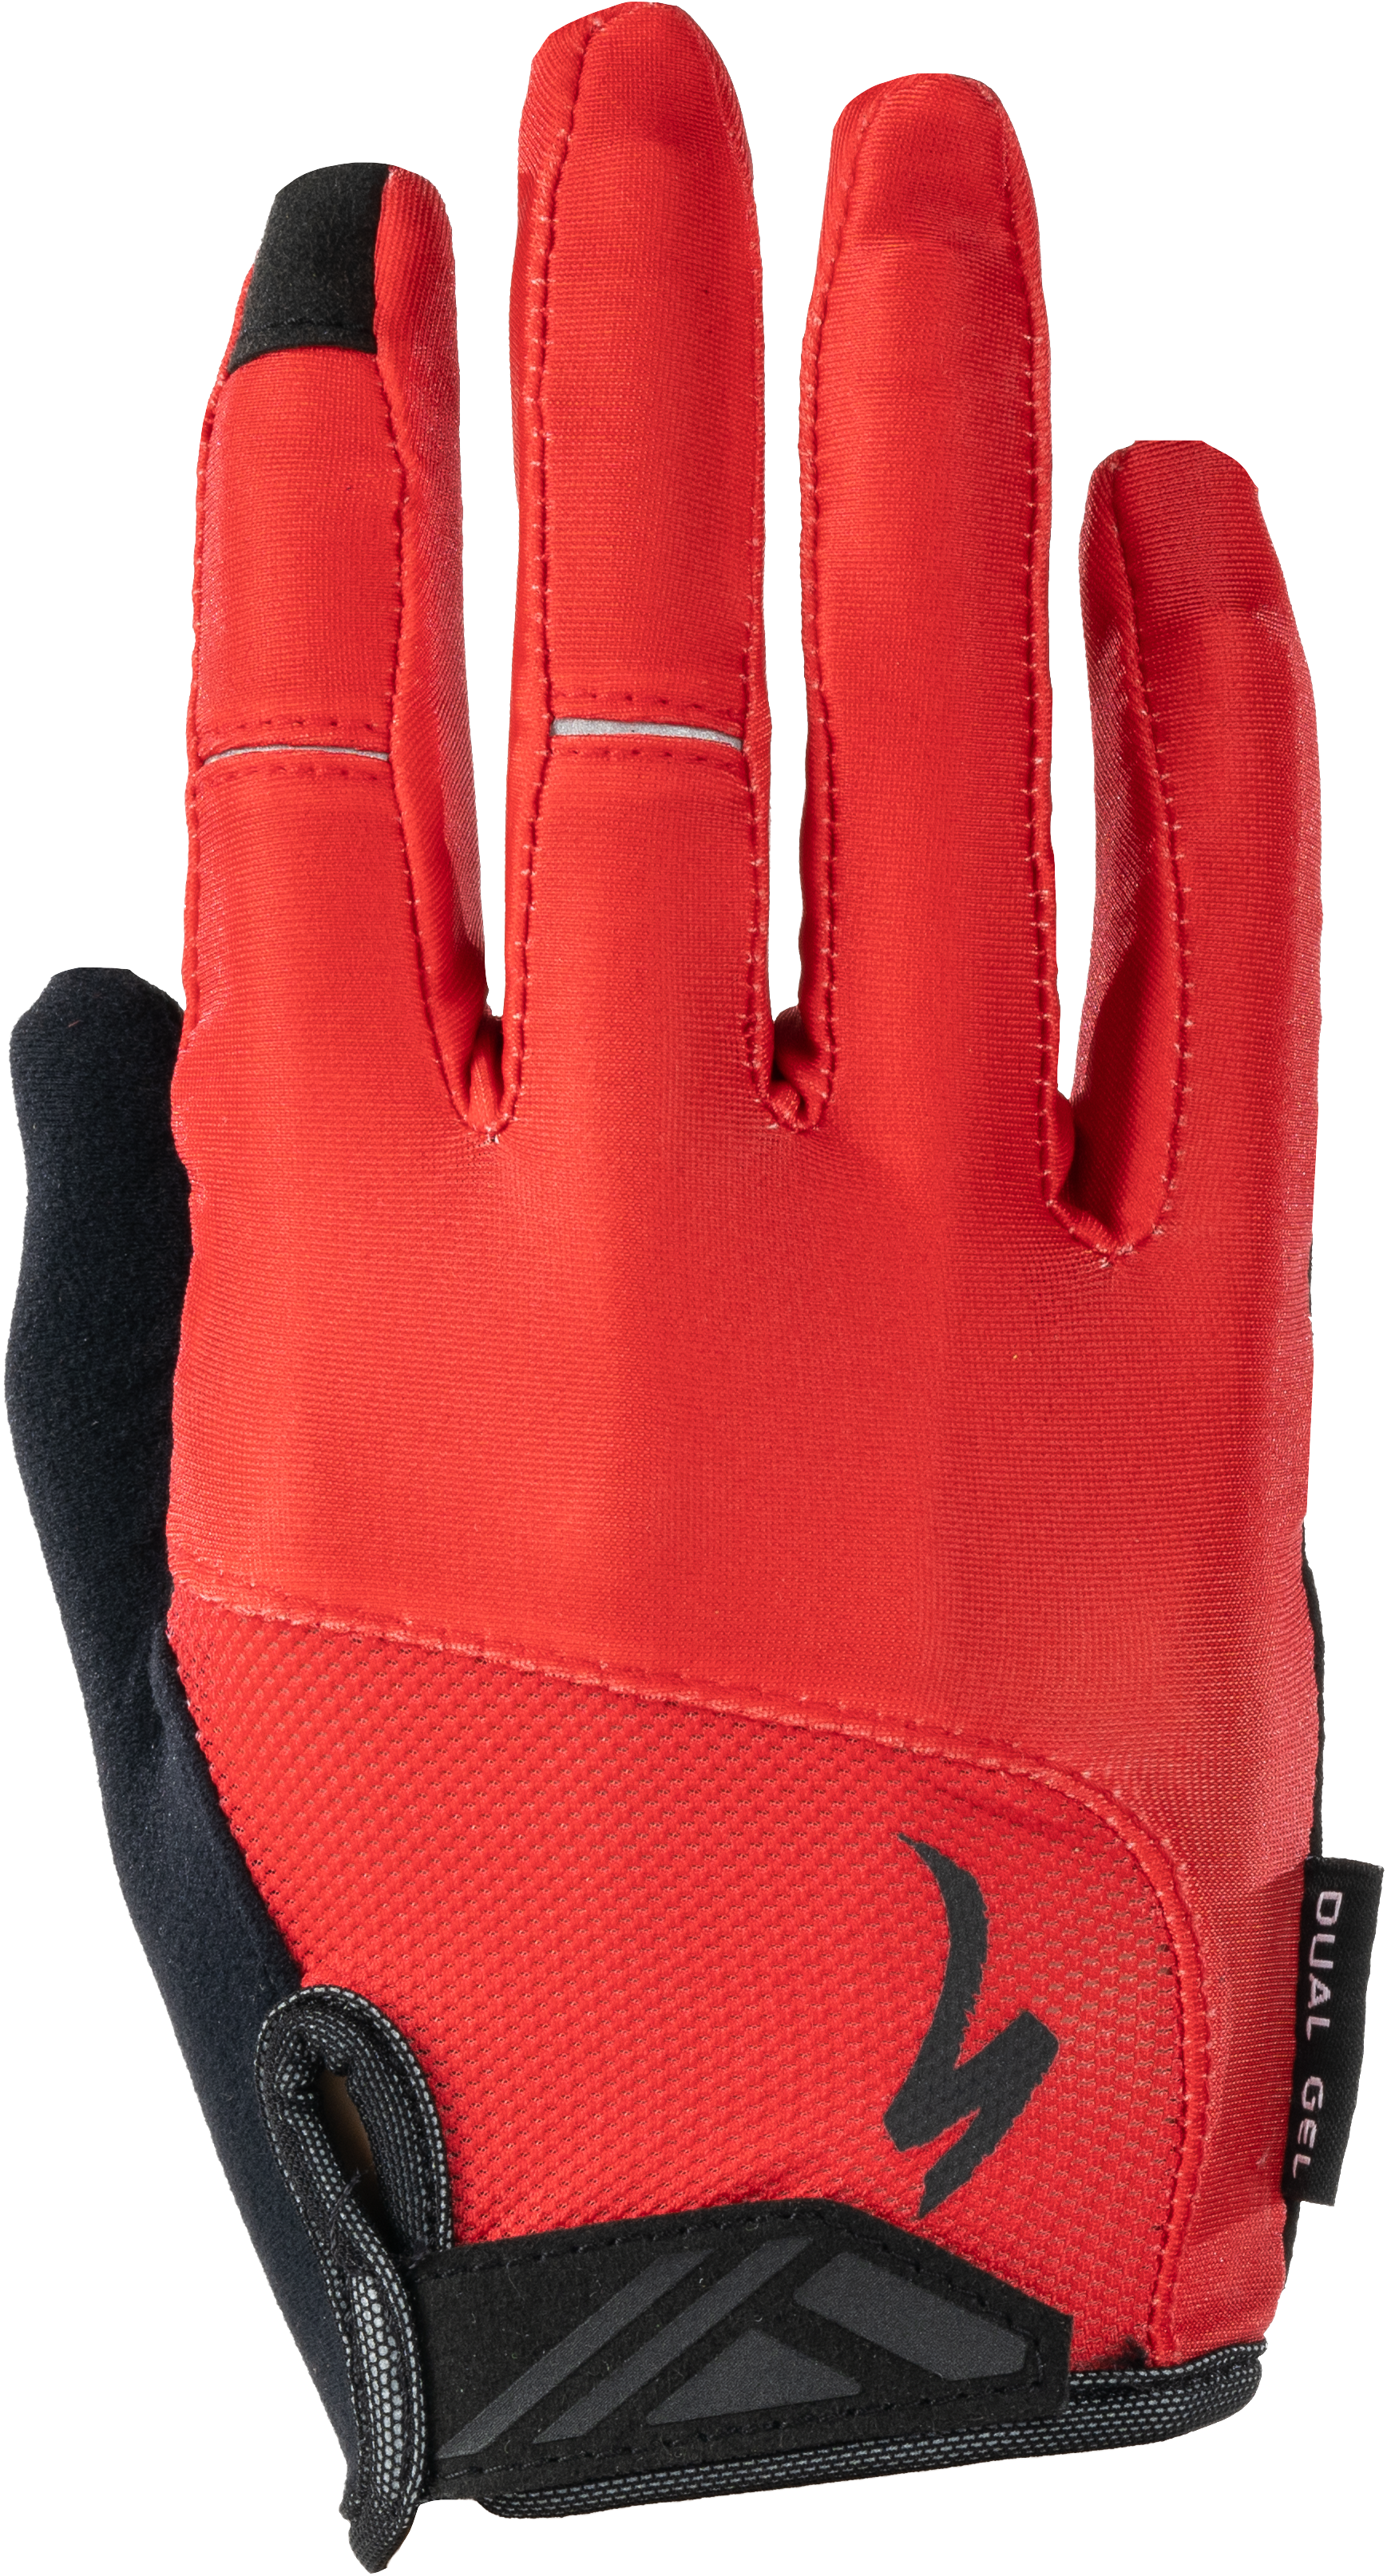 SPECIALIZED gants vélo hiver Waterproof CYCLES ET SPORTS